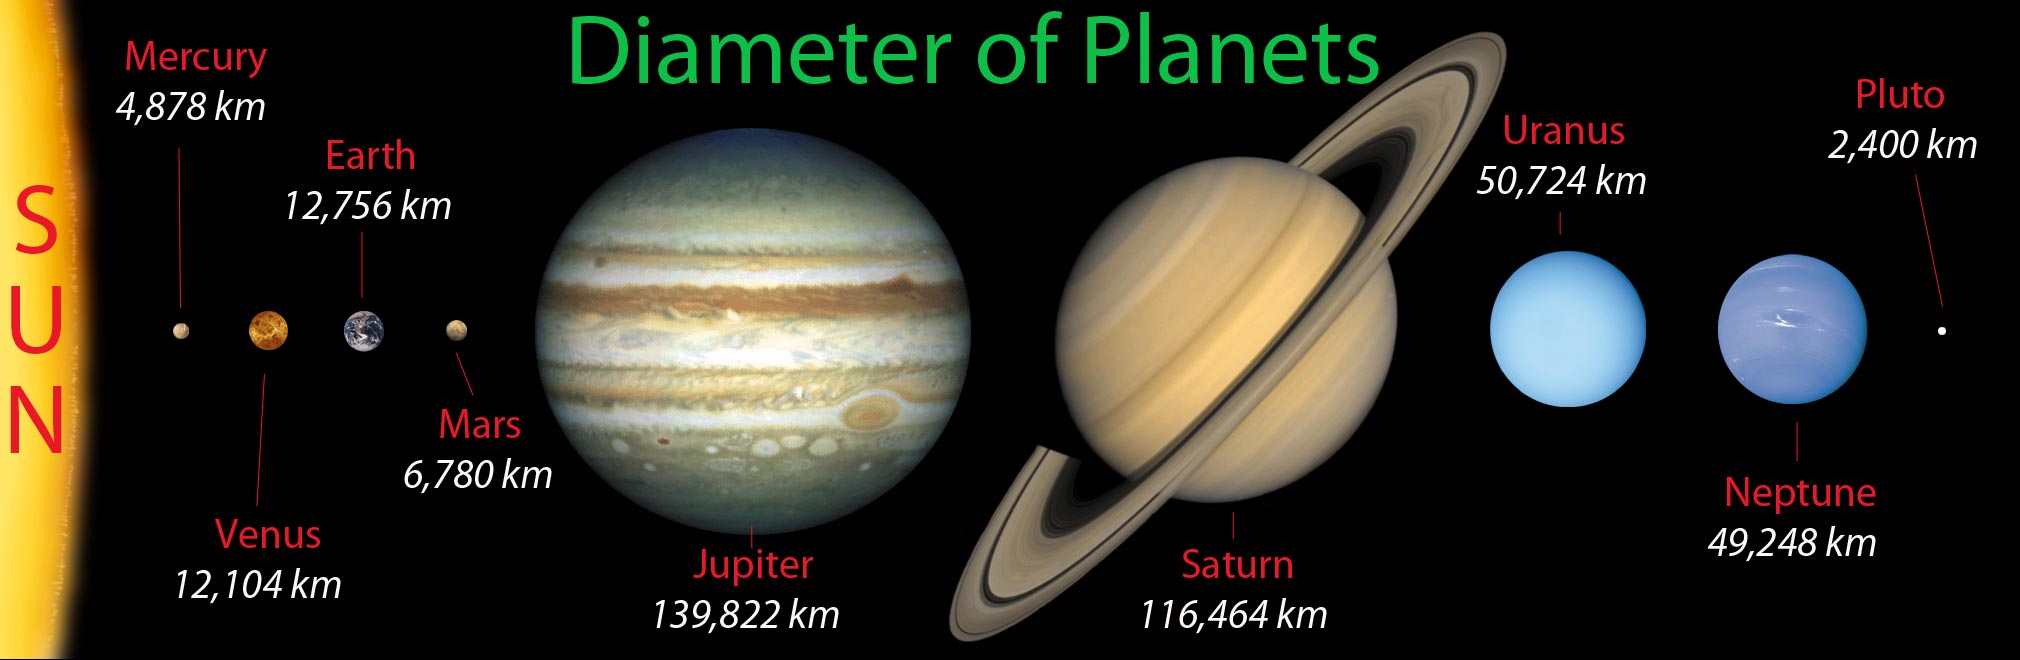 size-of-planets-in-order-diameter-of-planets-comparison